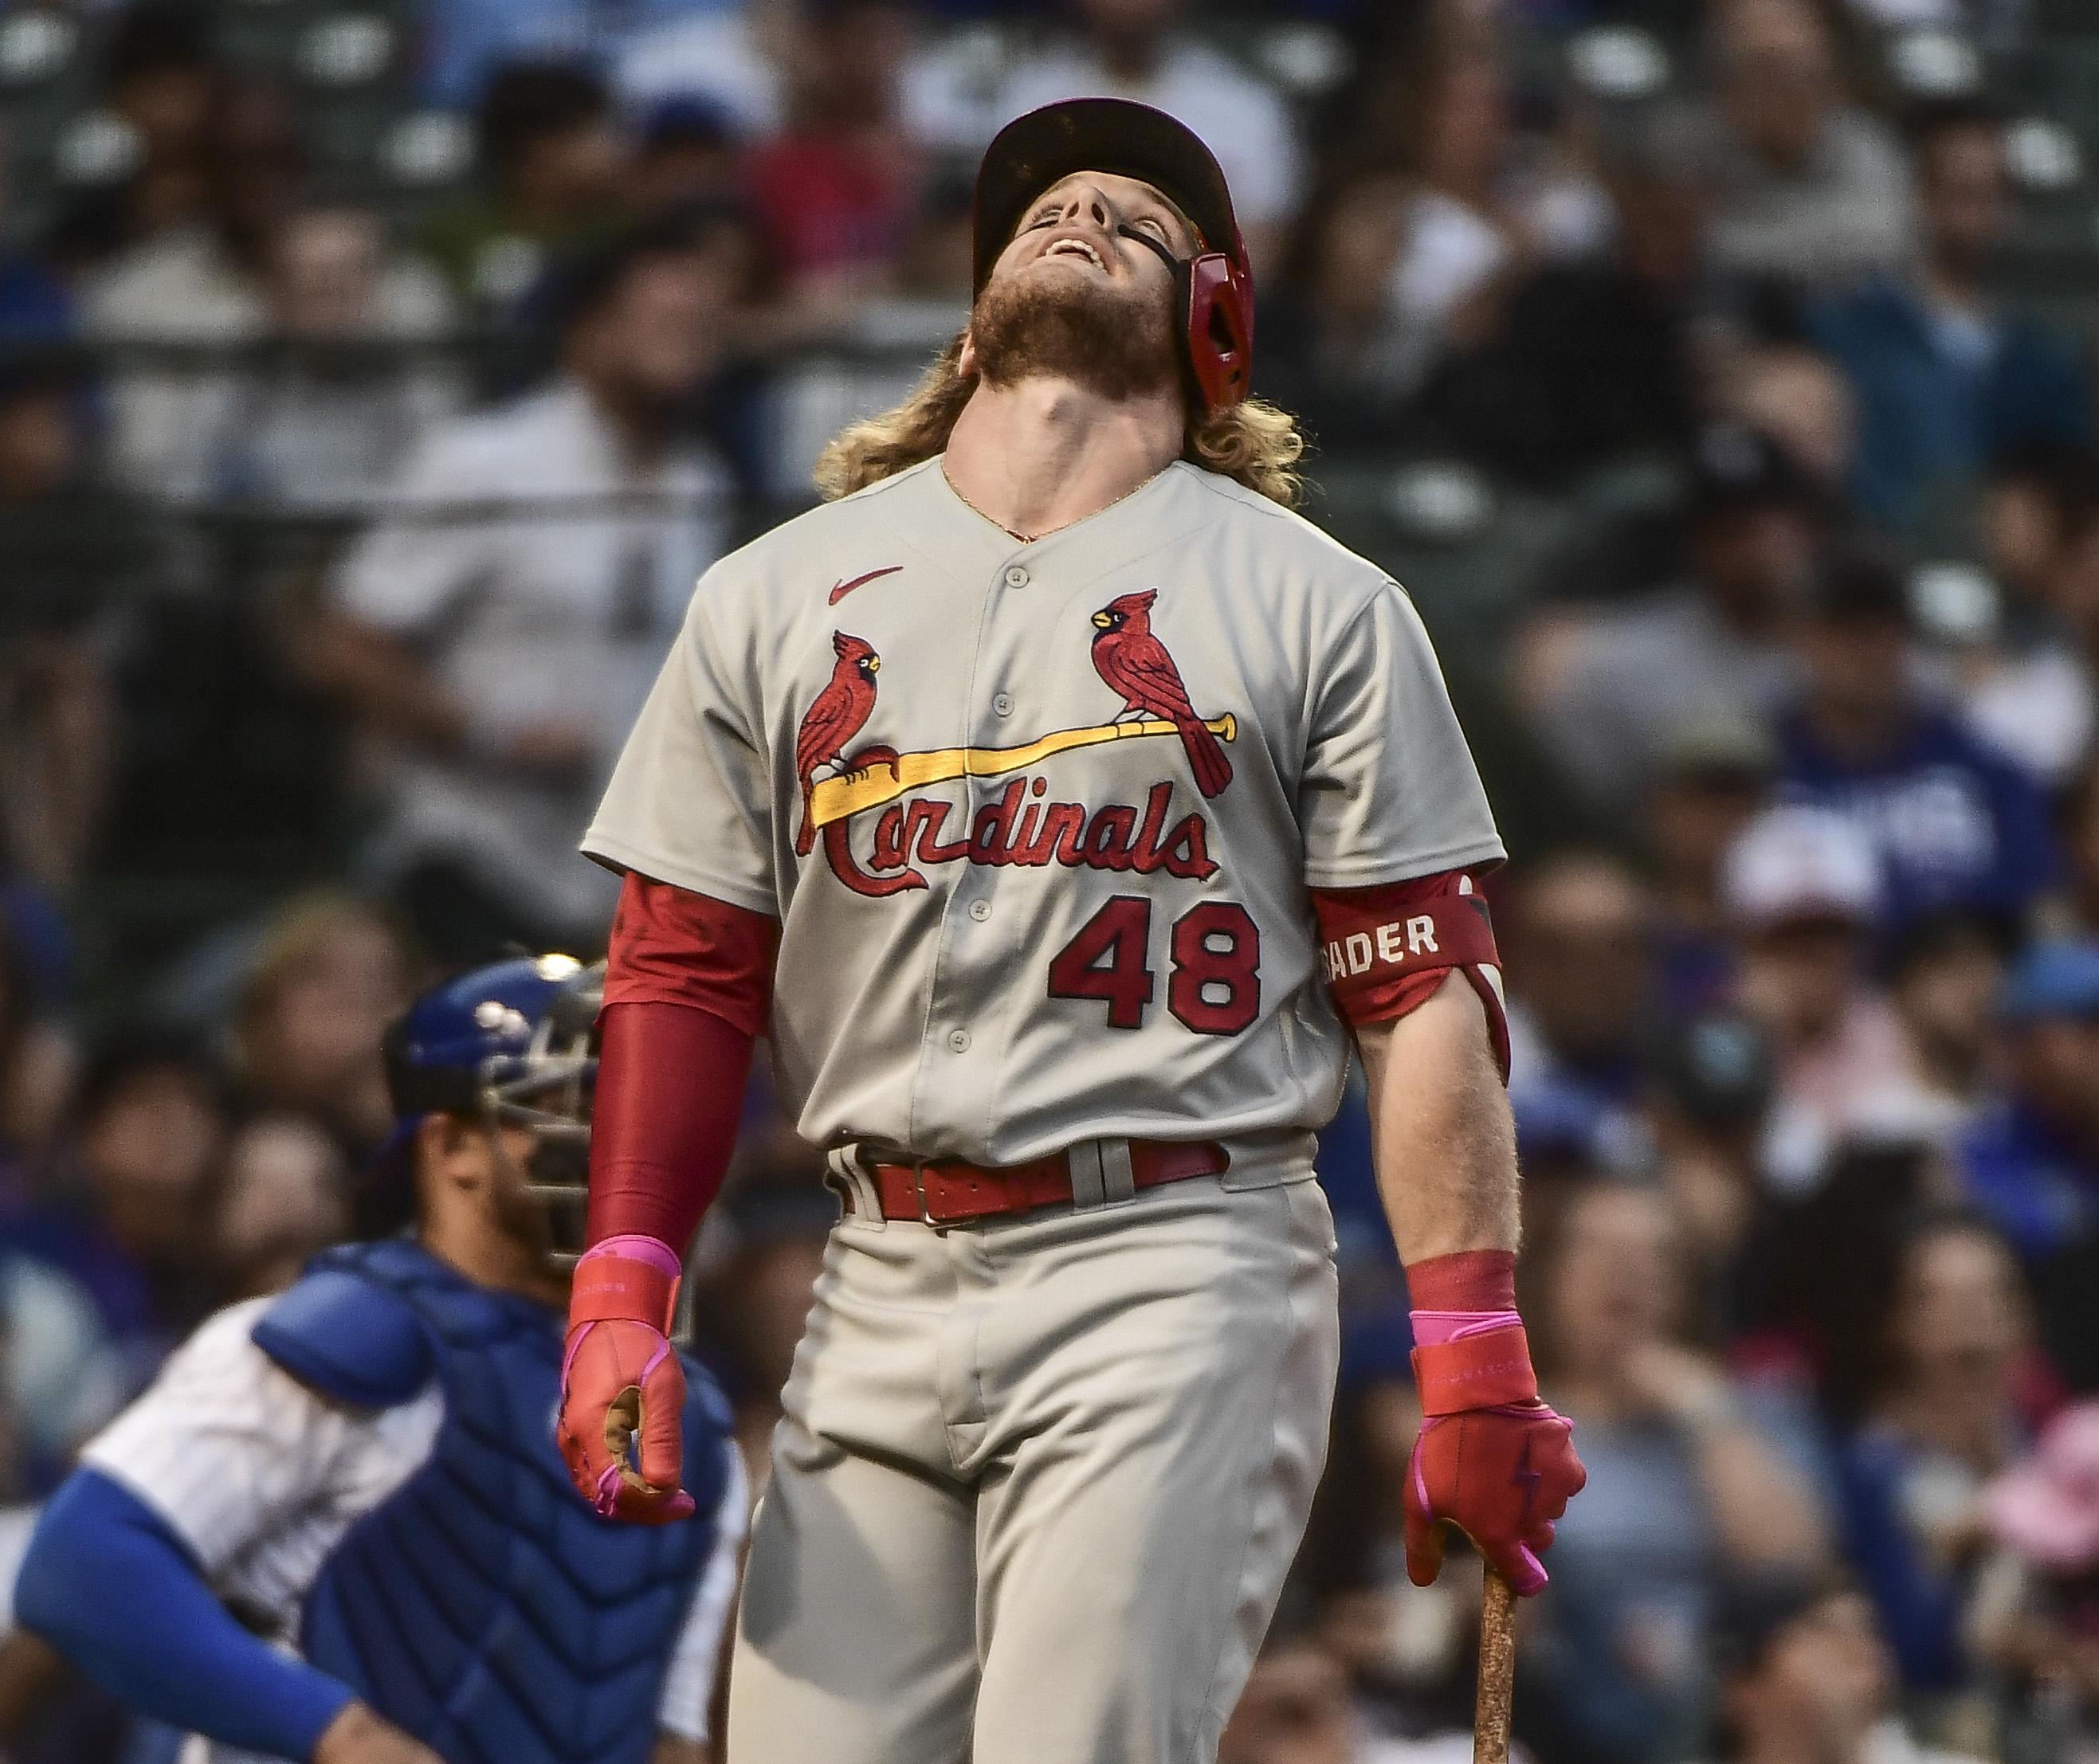 Harrison Bader's energy will help the Cardinals cook